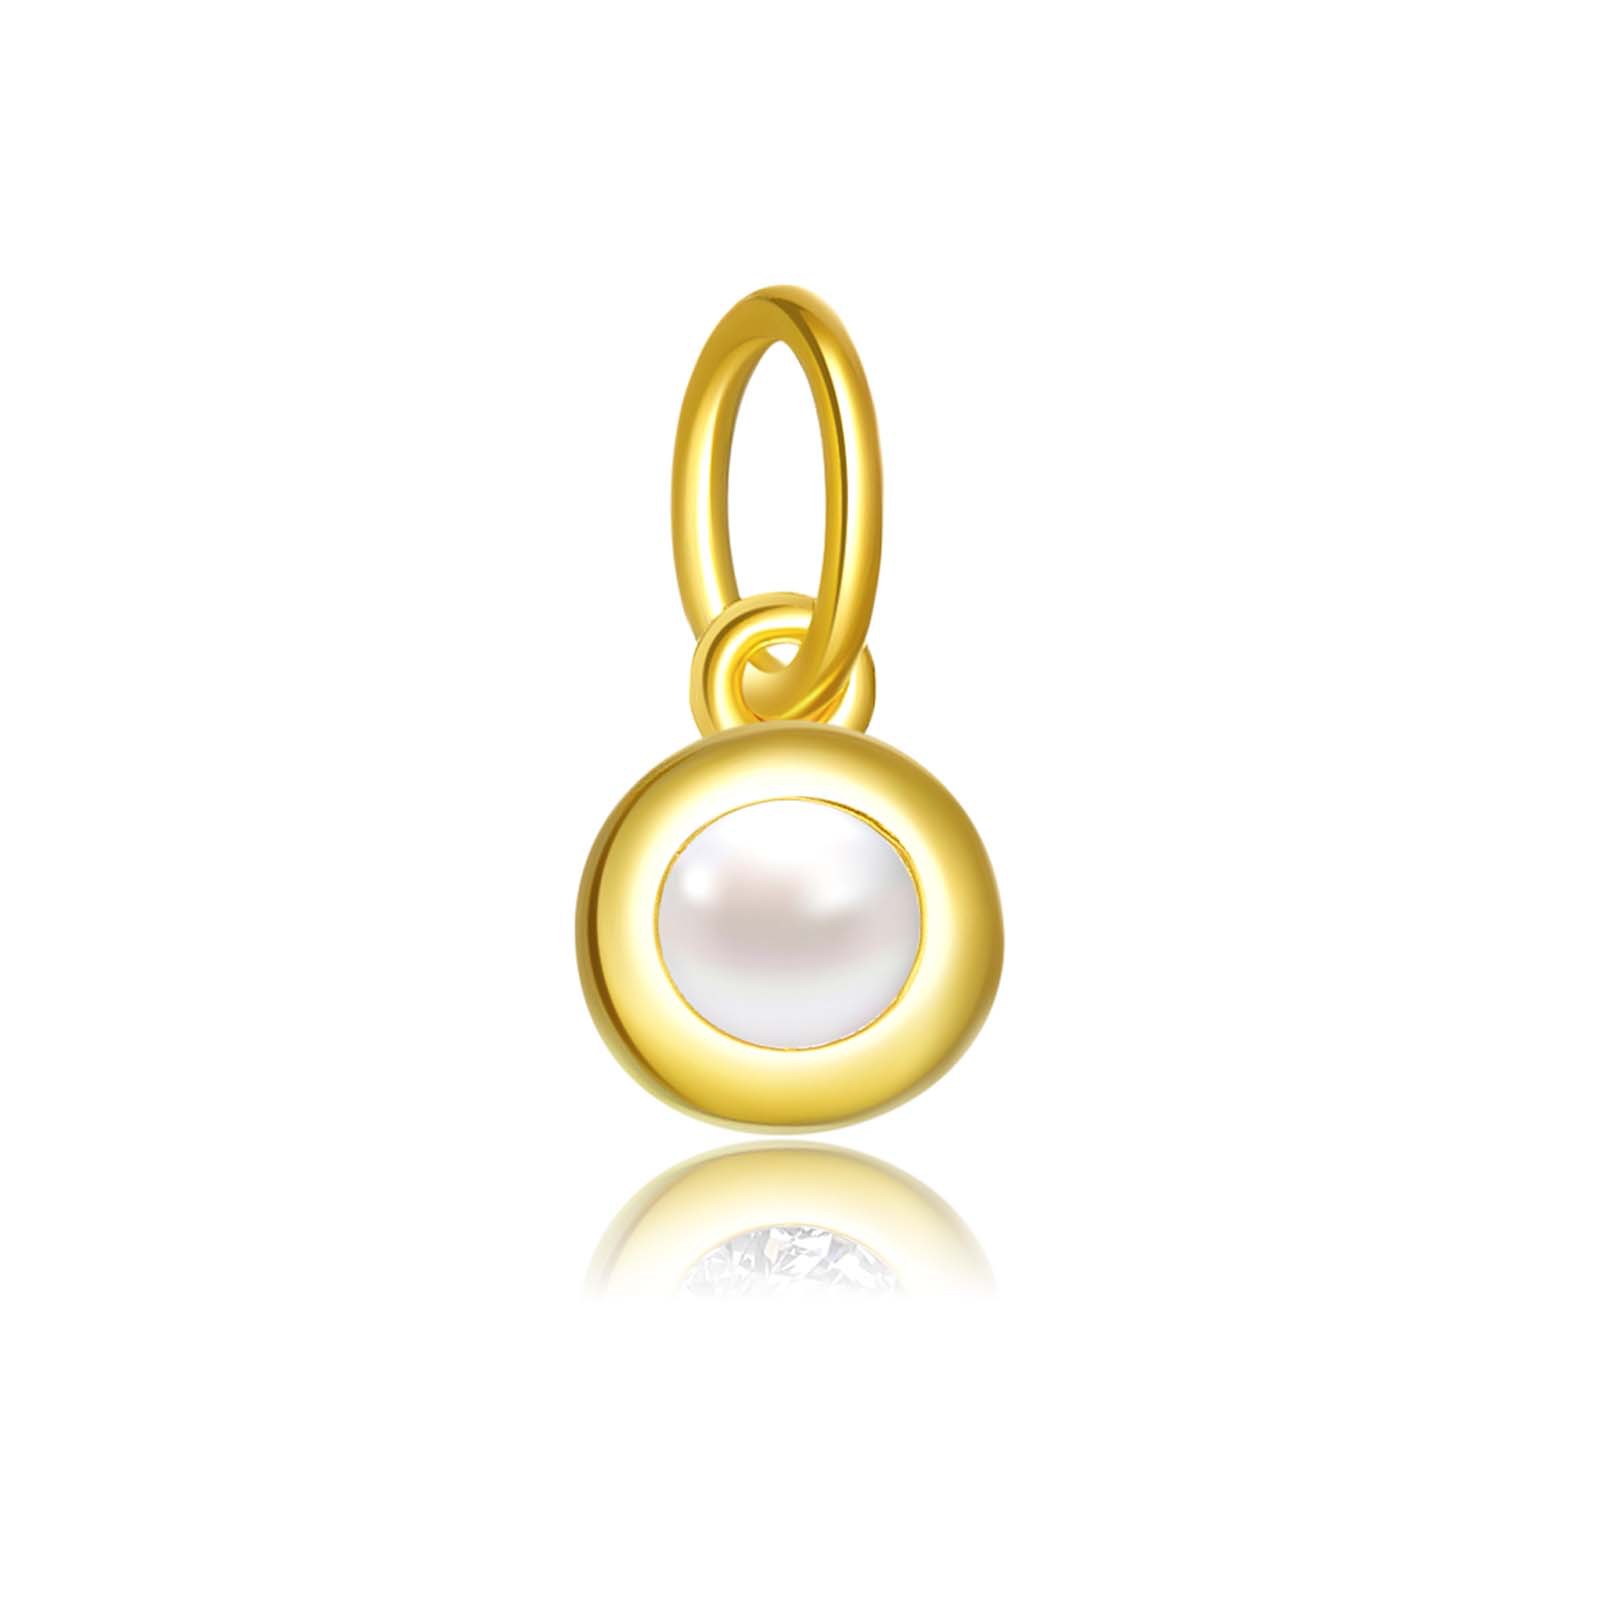 18:18K gold - Pearl